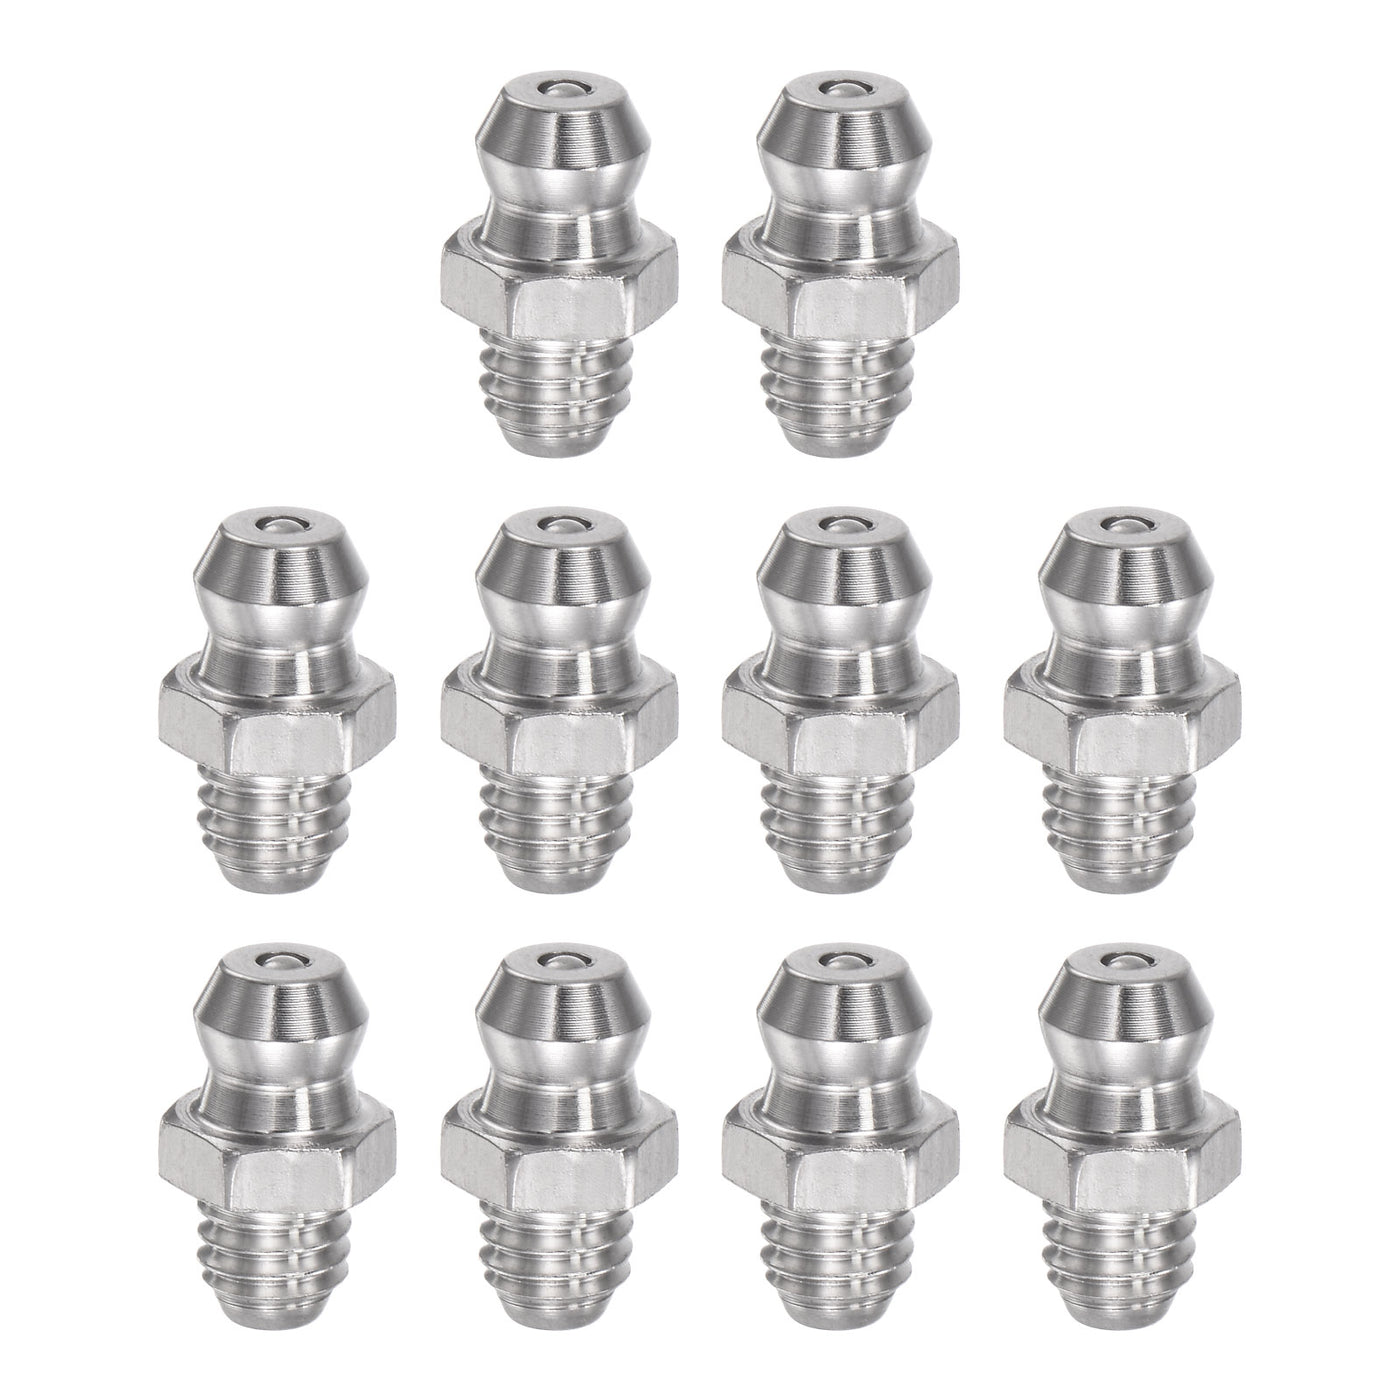 Uxcell Uxcell 201 Stainless Steel Straight Hydraulic Grease Fitting M8 x 1mm Thread, 10Pcs